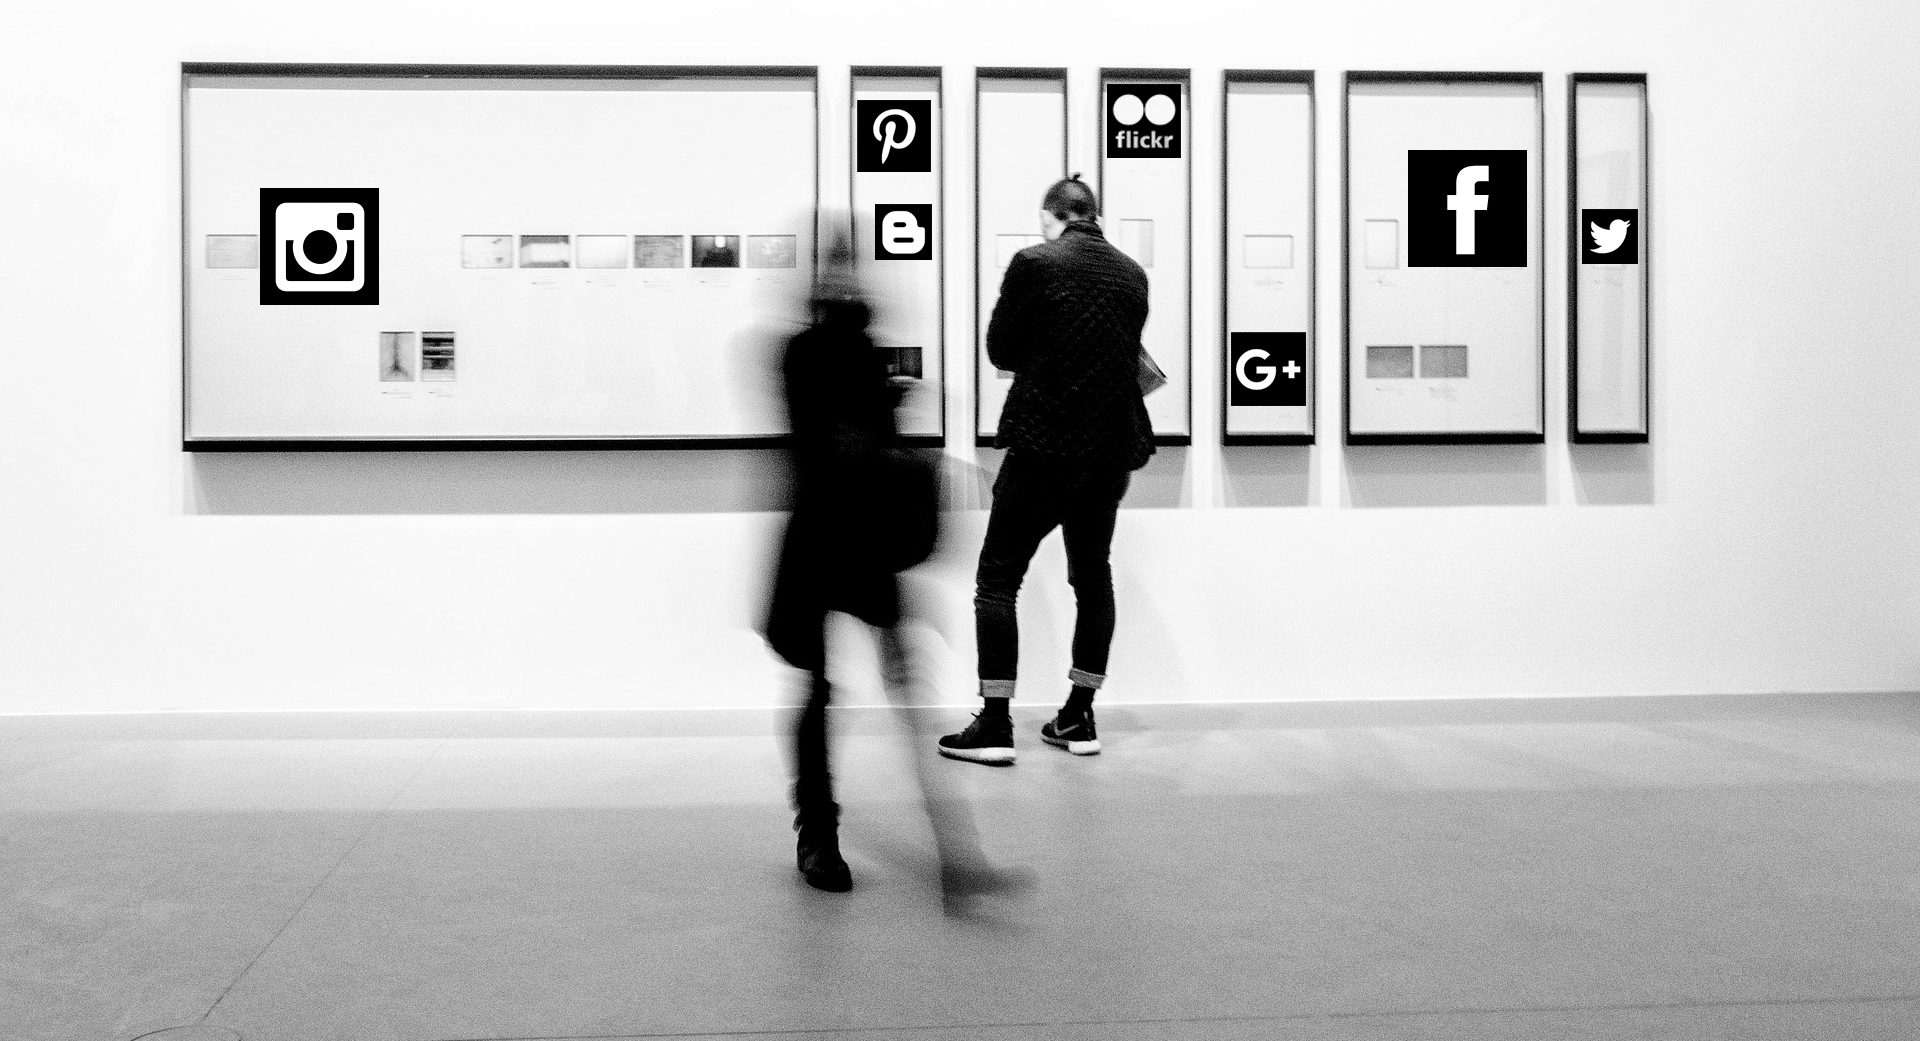 Gallery with social media icons